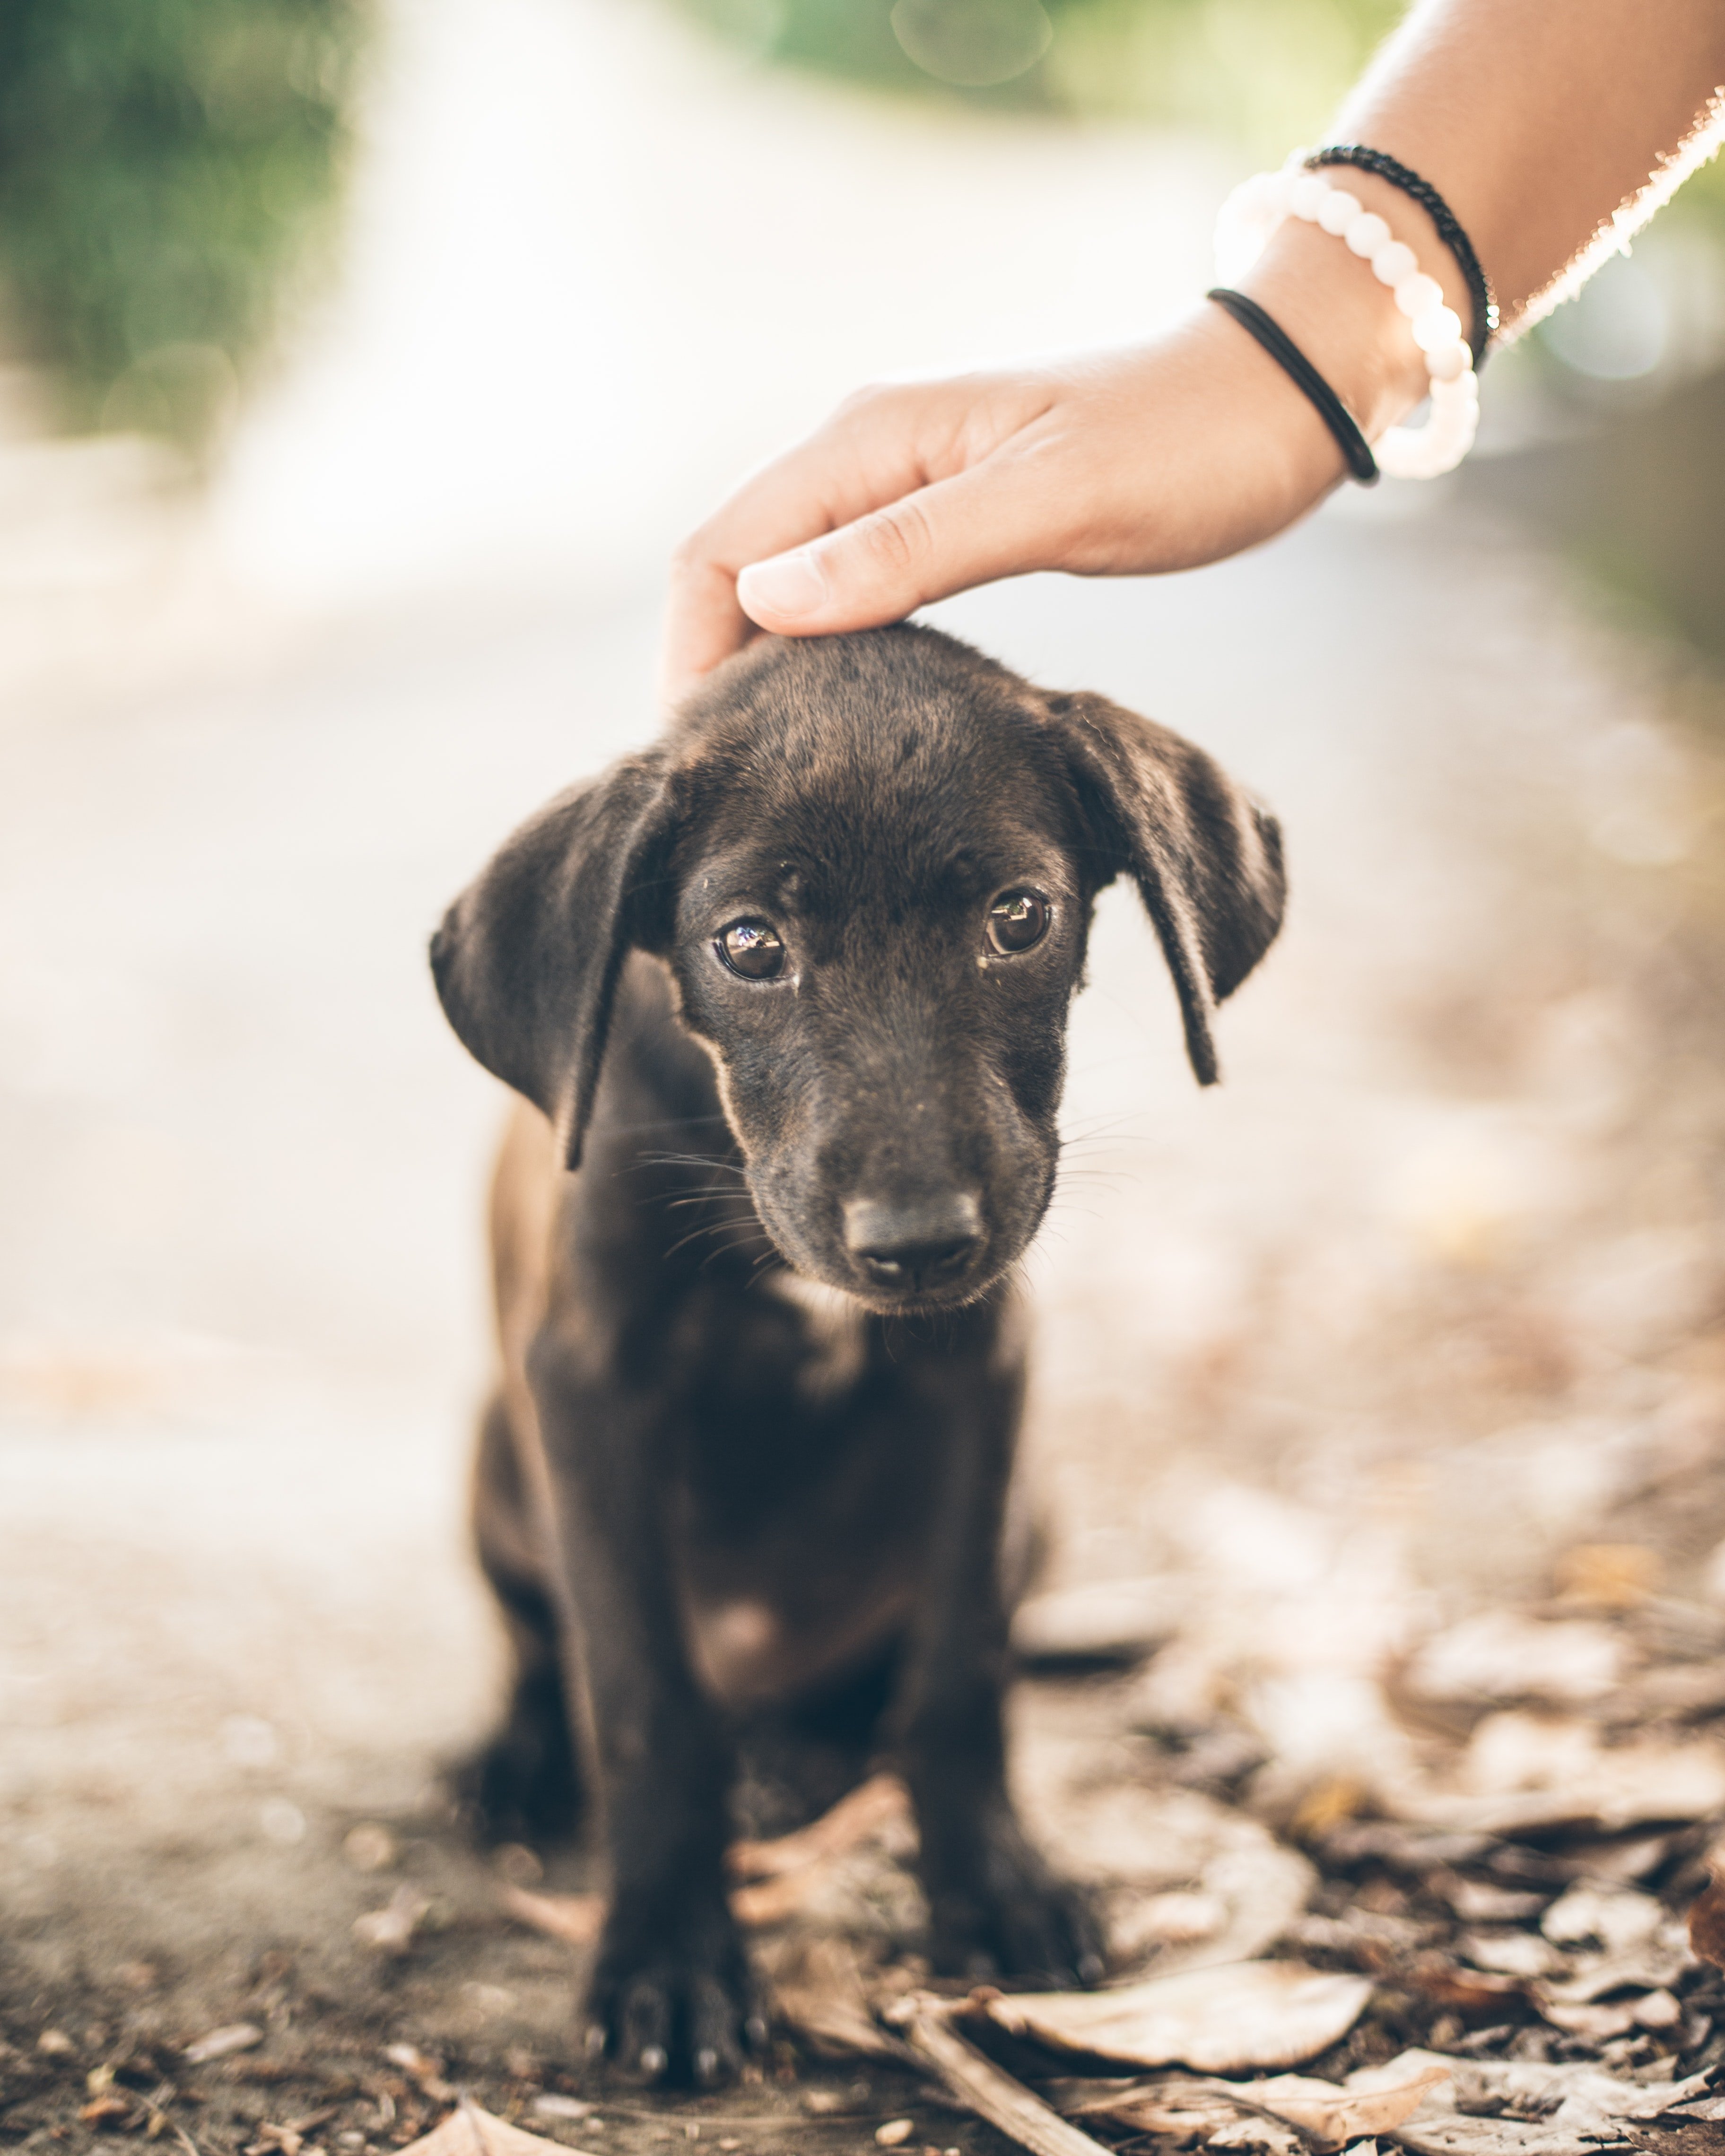 A person pats a dog on the head. | Source: Unsplash